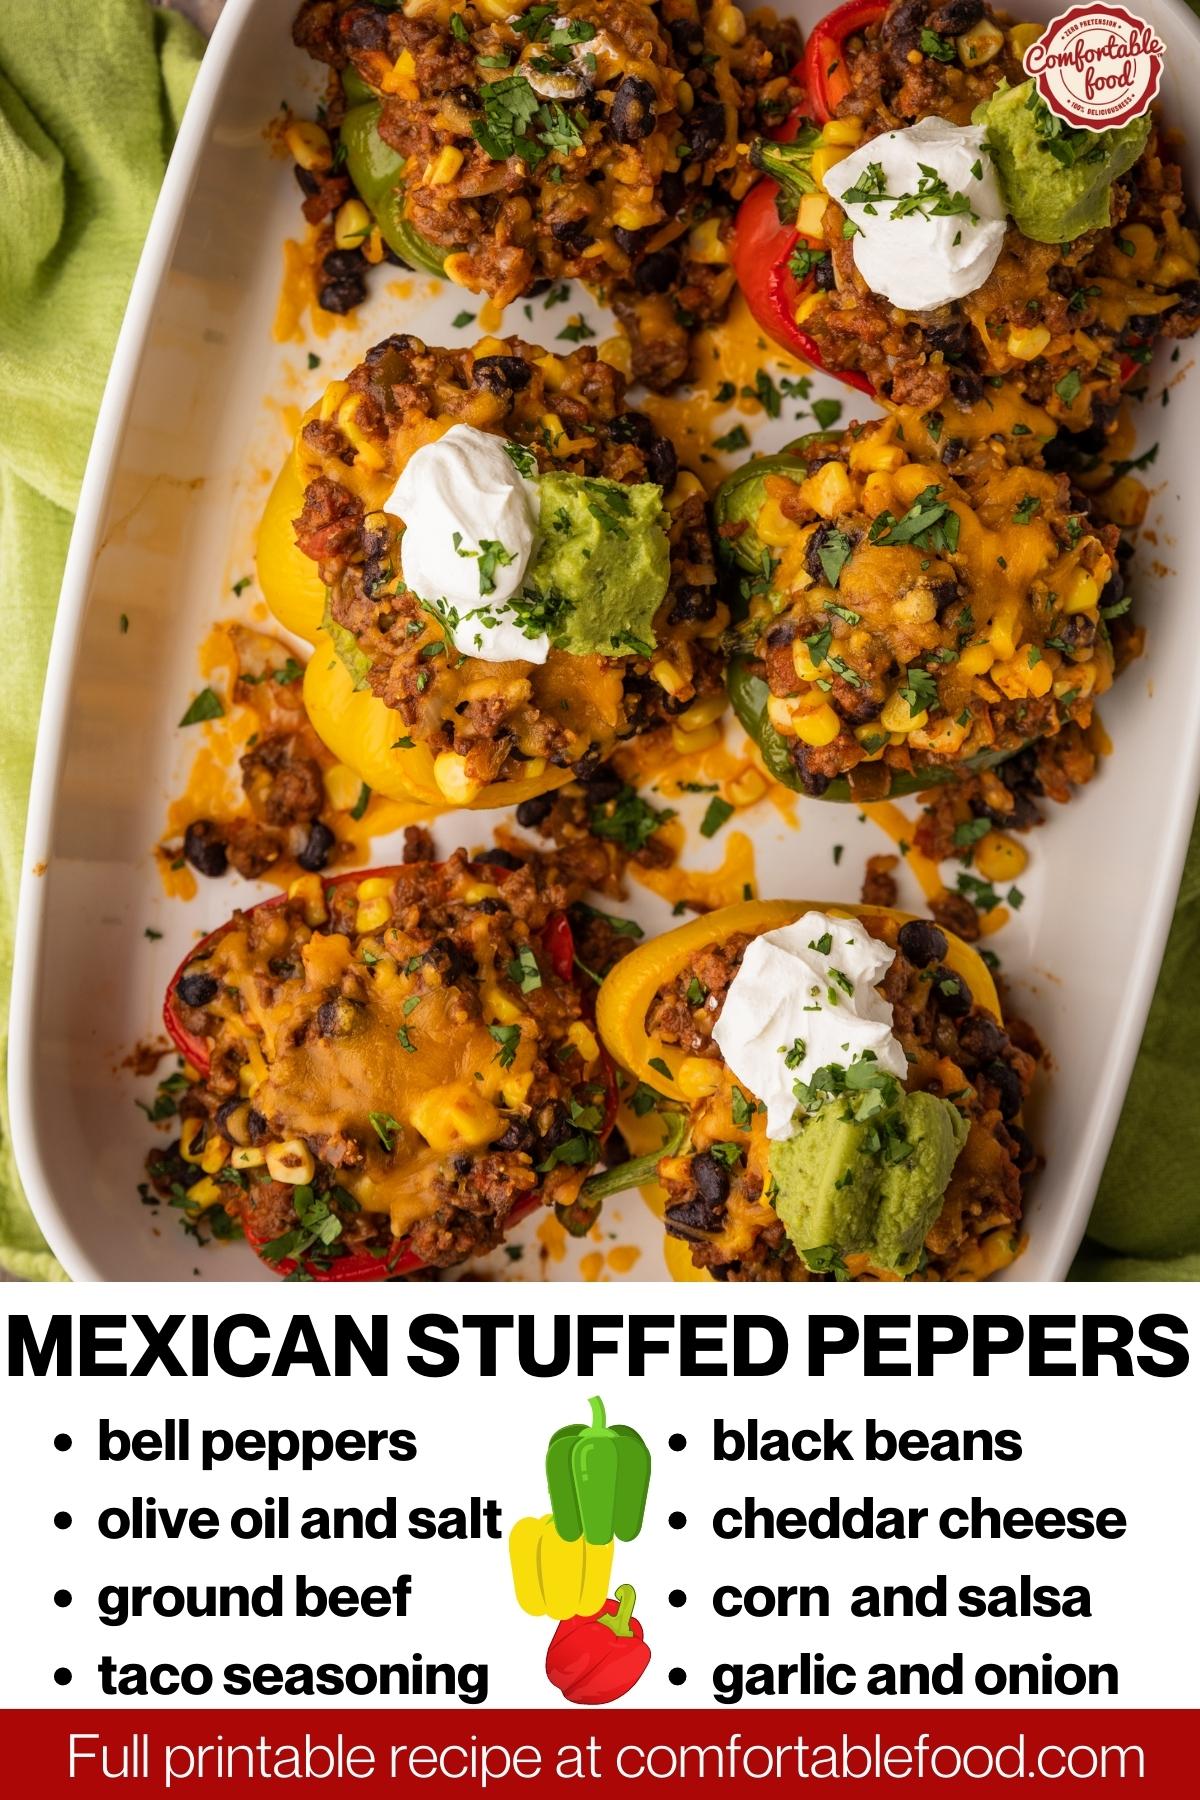 Mexican stuffed peppers - socials